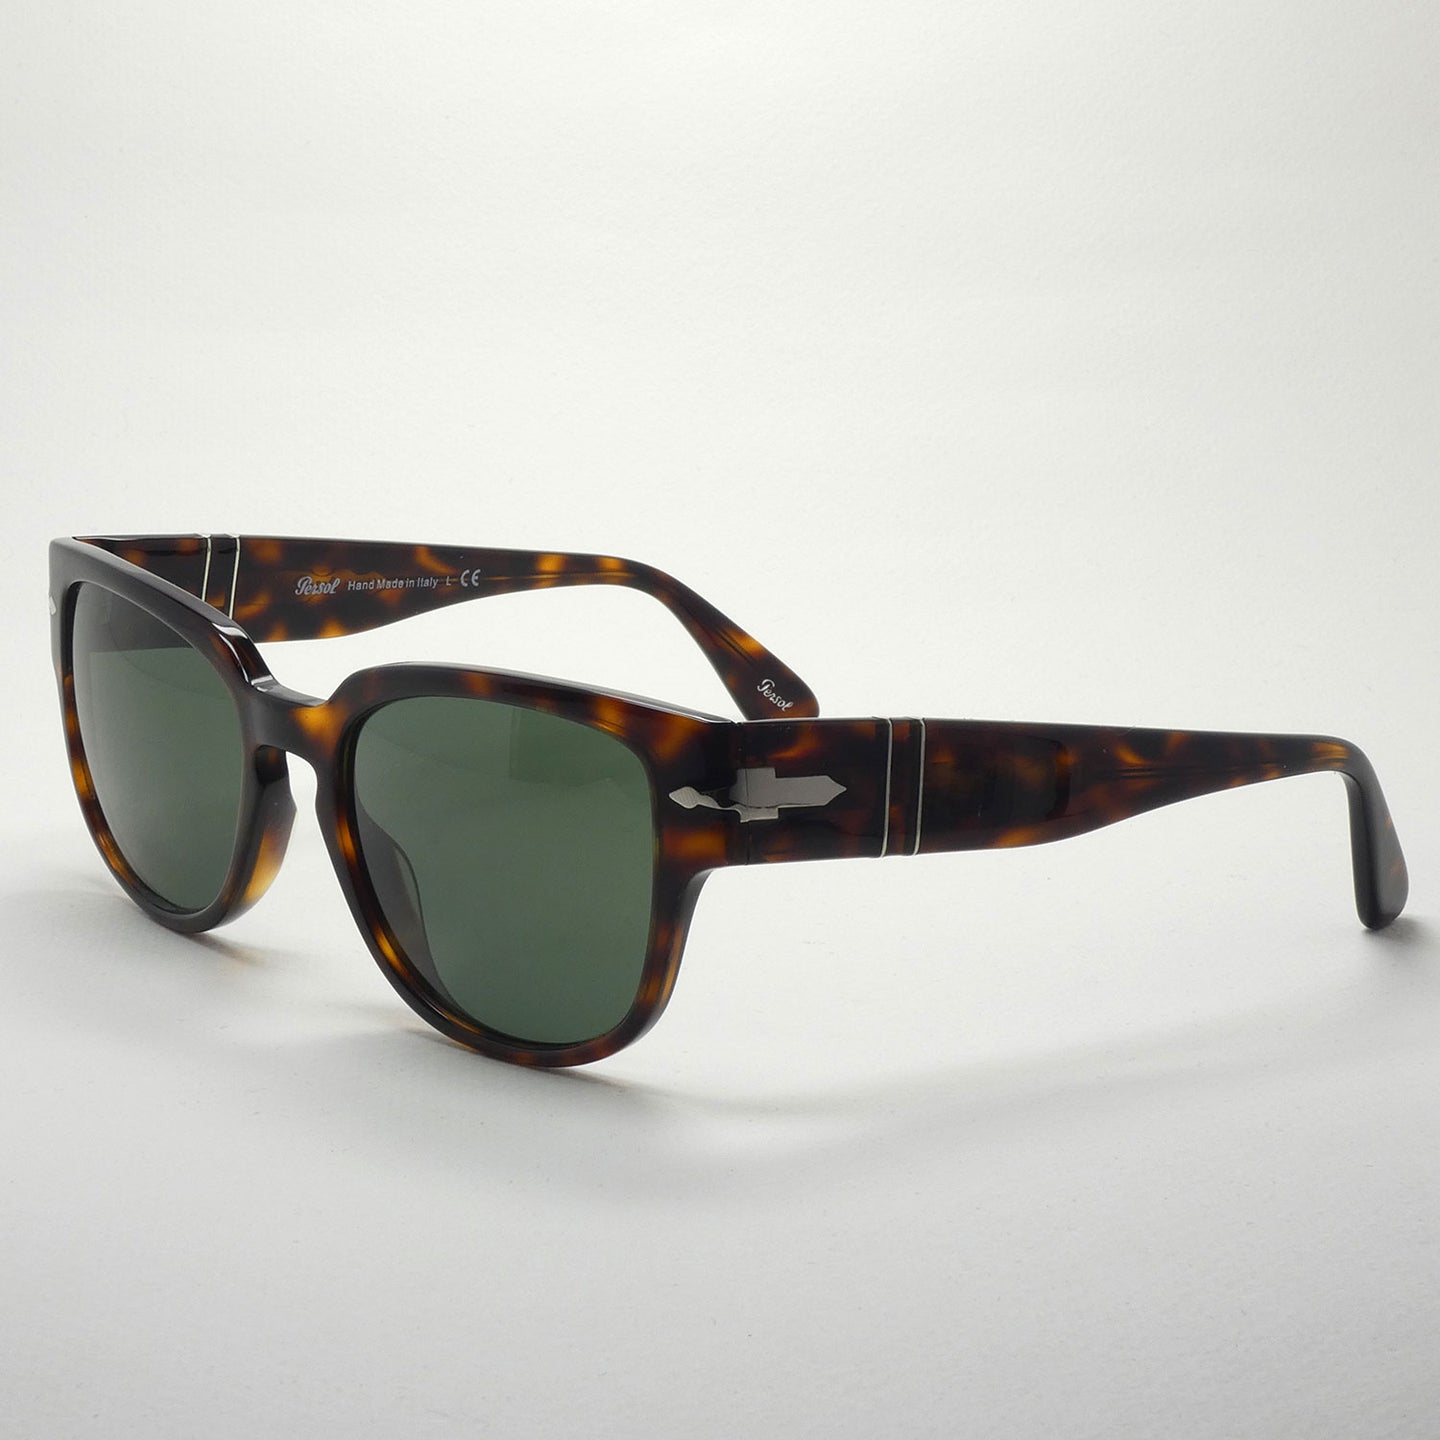 sunglasses persol 3231 24/31 size 51 angled view